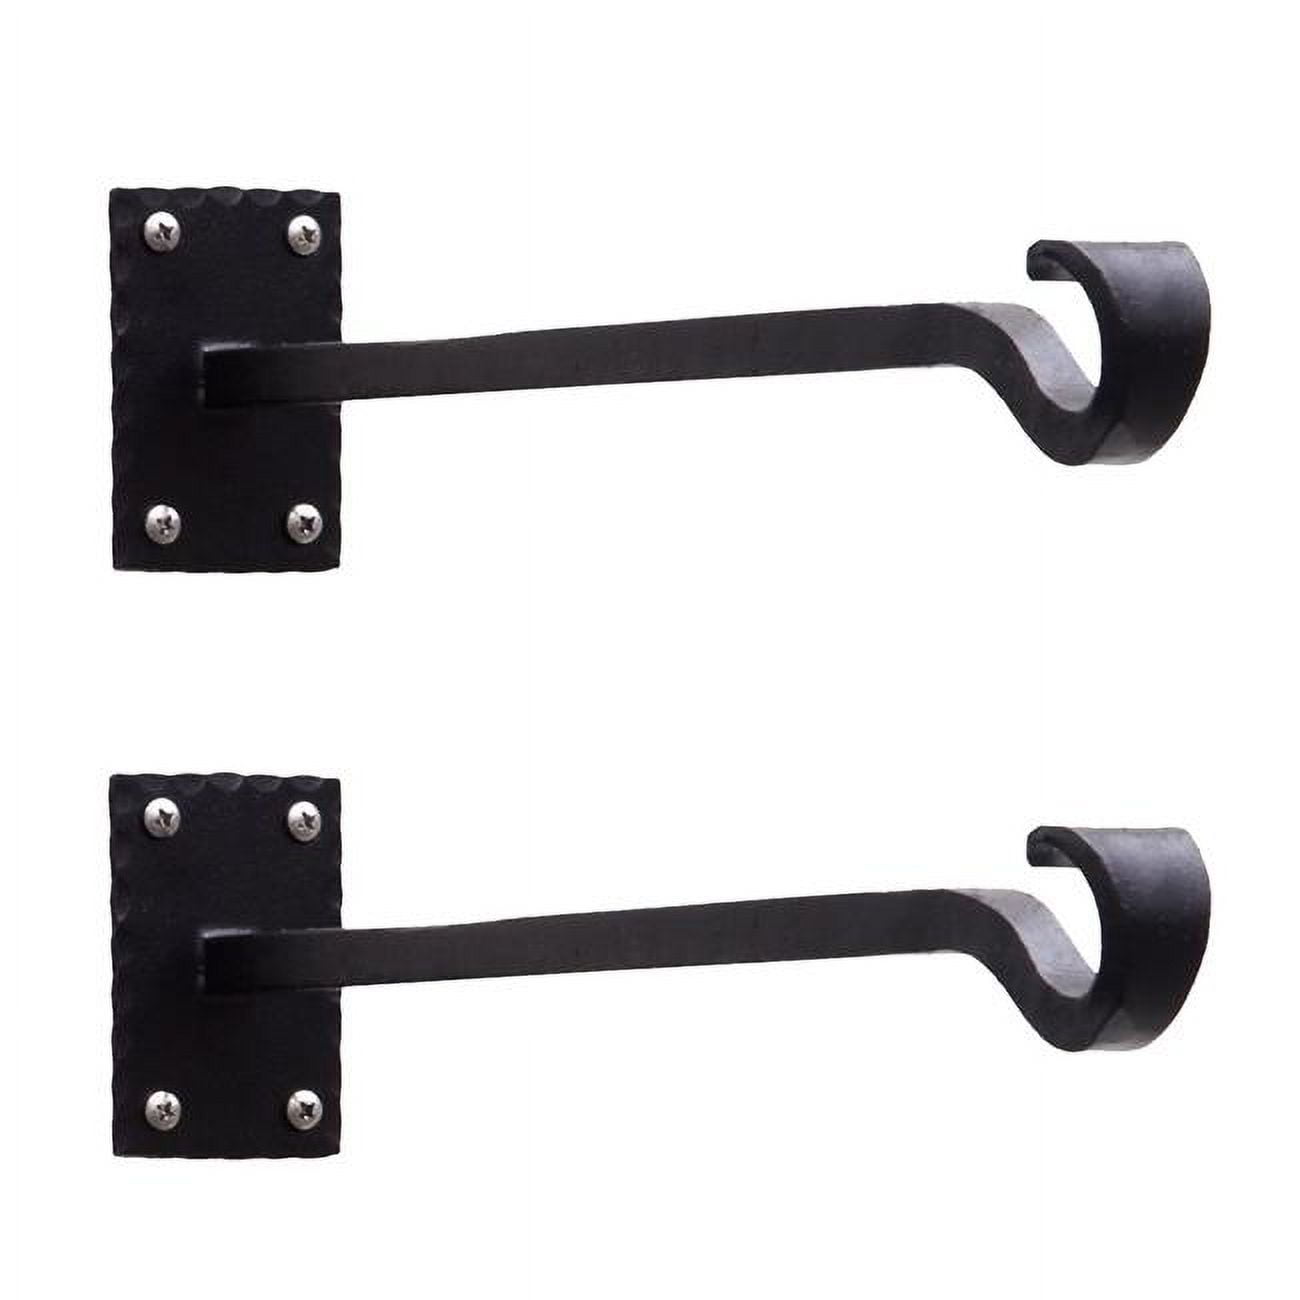 Picture of Achla Designs B-106-2 Lodge Straight Bracket, Black - Pack of 2